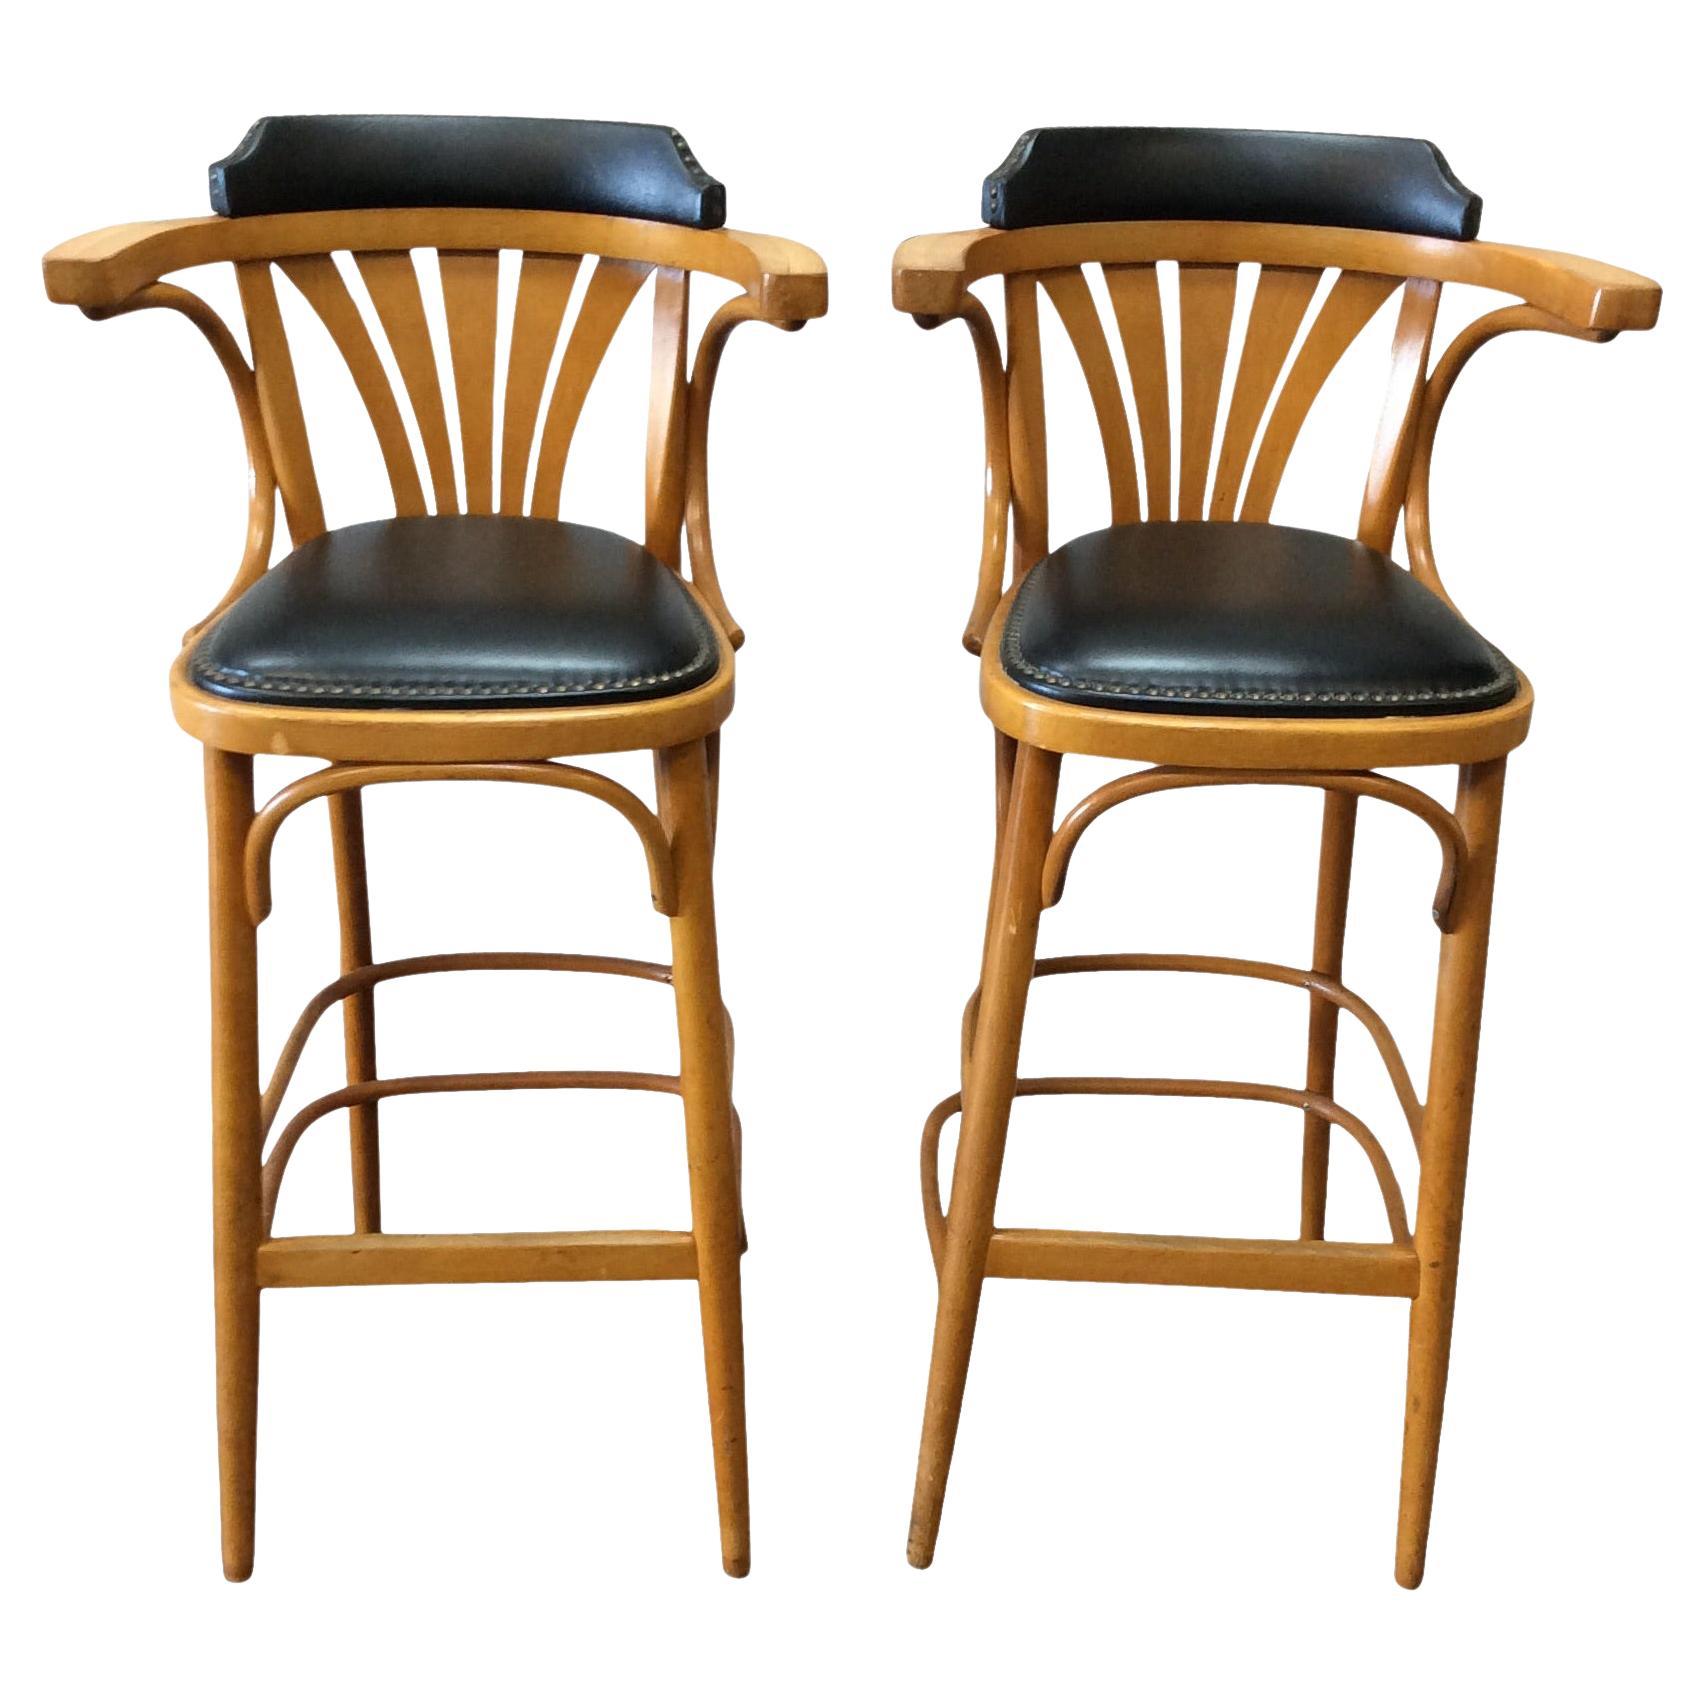 Mid-20th Century French Leather Counter or Barstools, a Pair For Sale